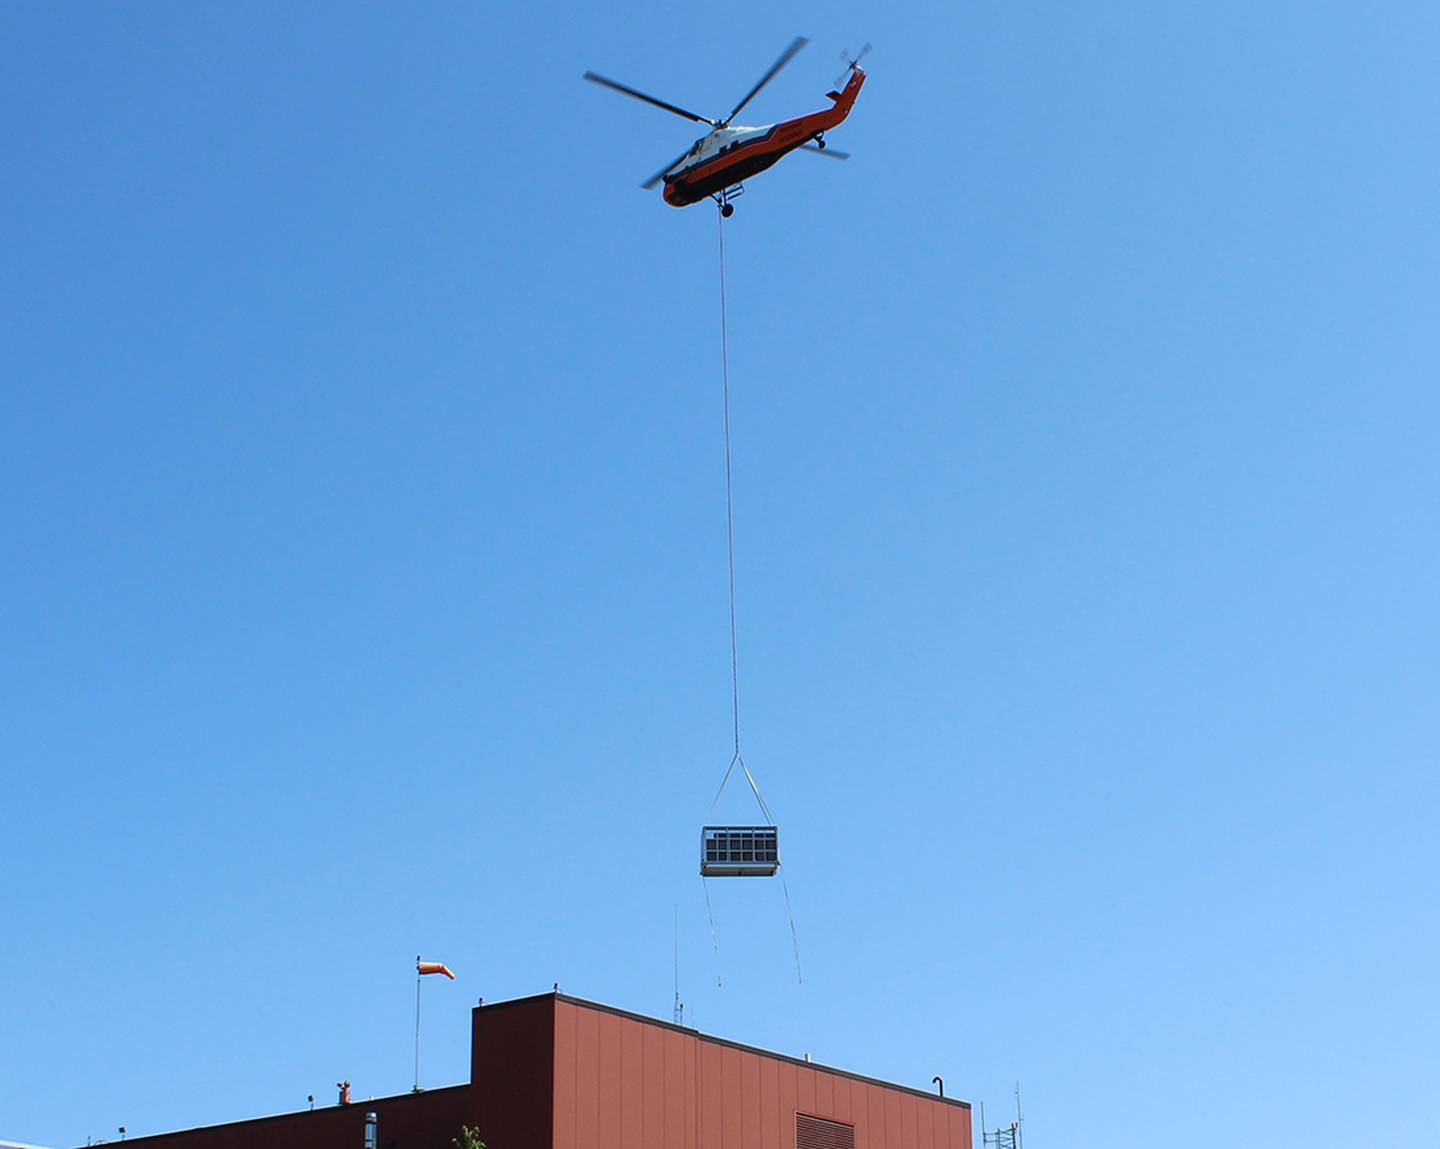 CGH Medical Center's air handling units being air lifted onto the hospital roof